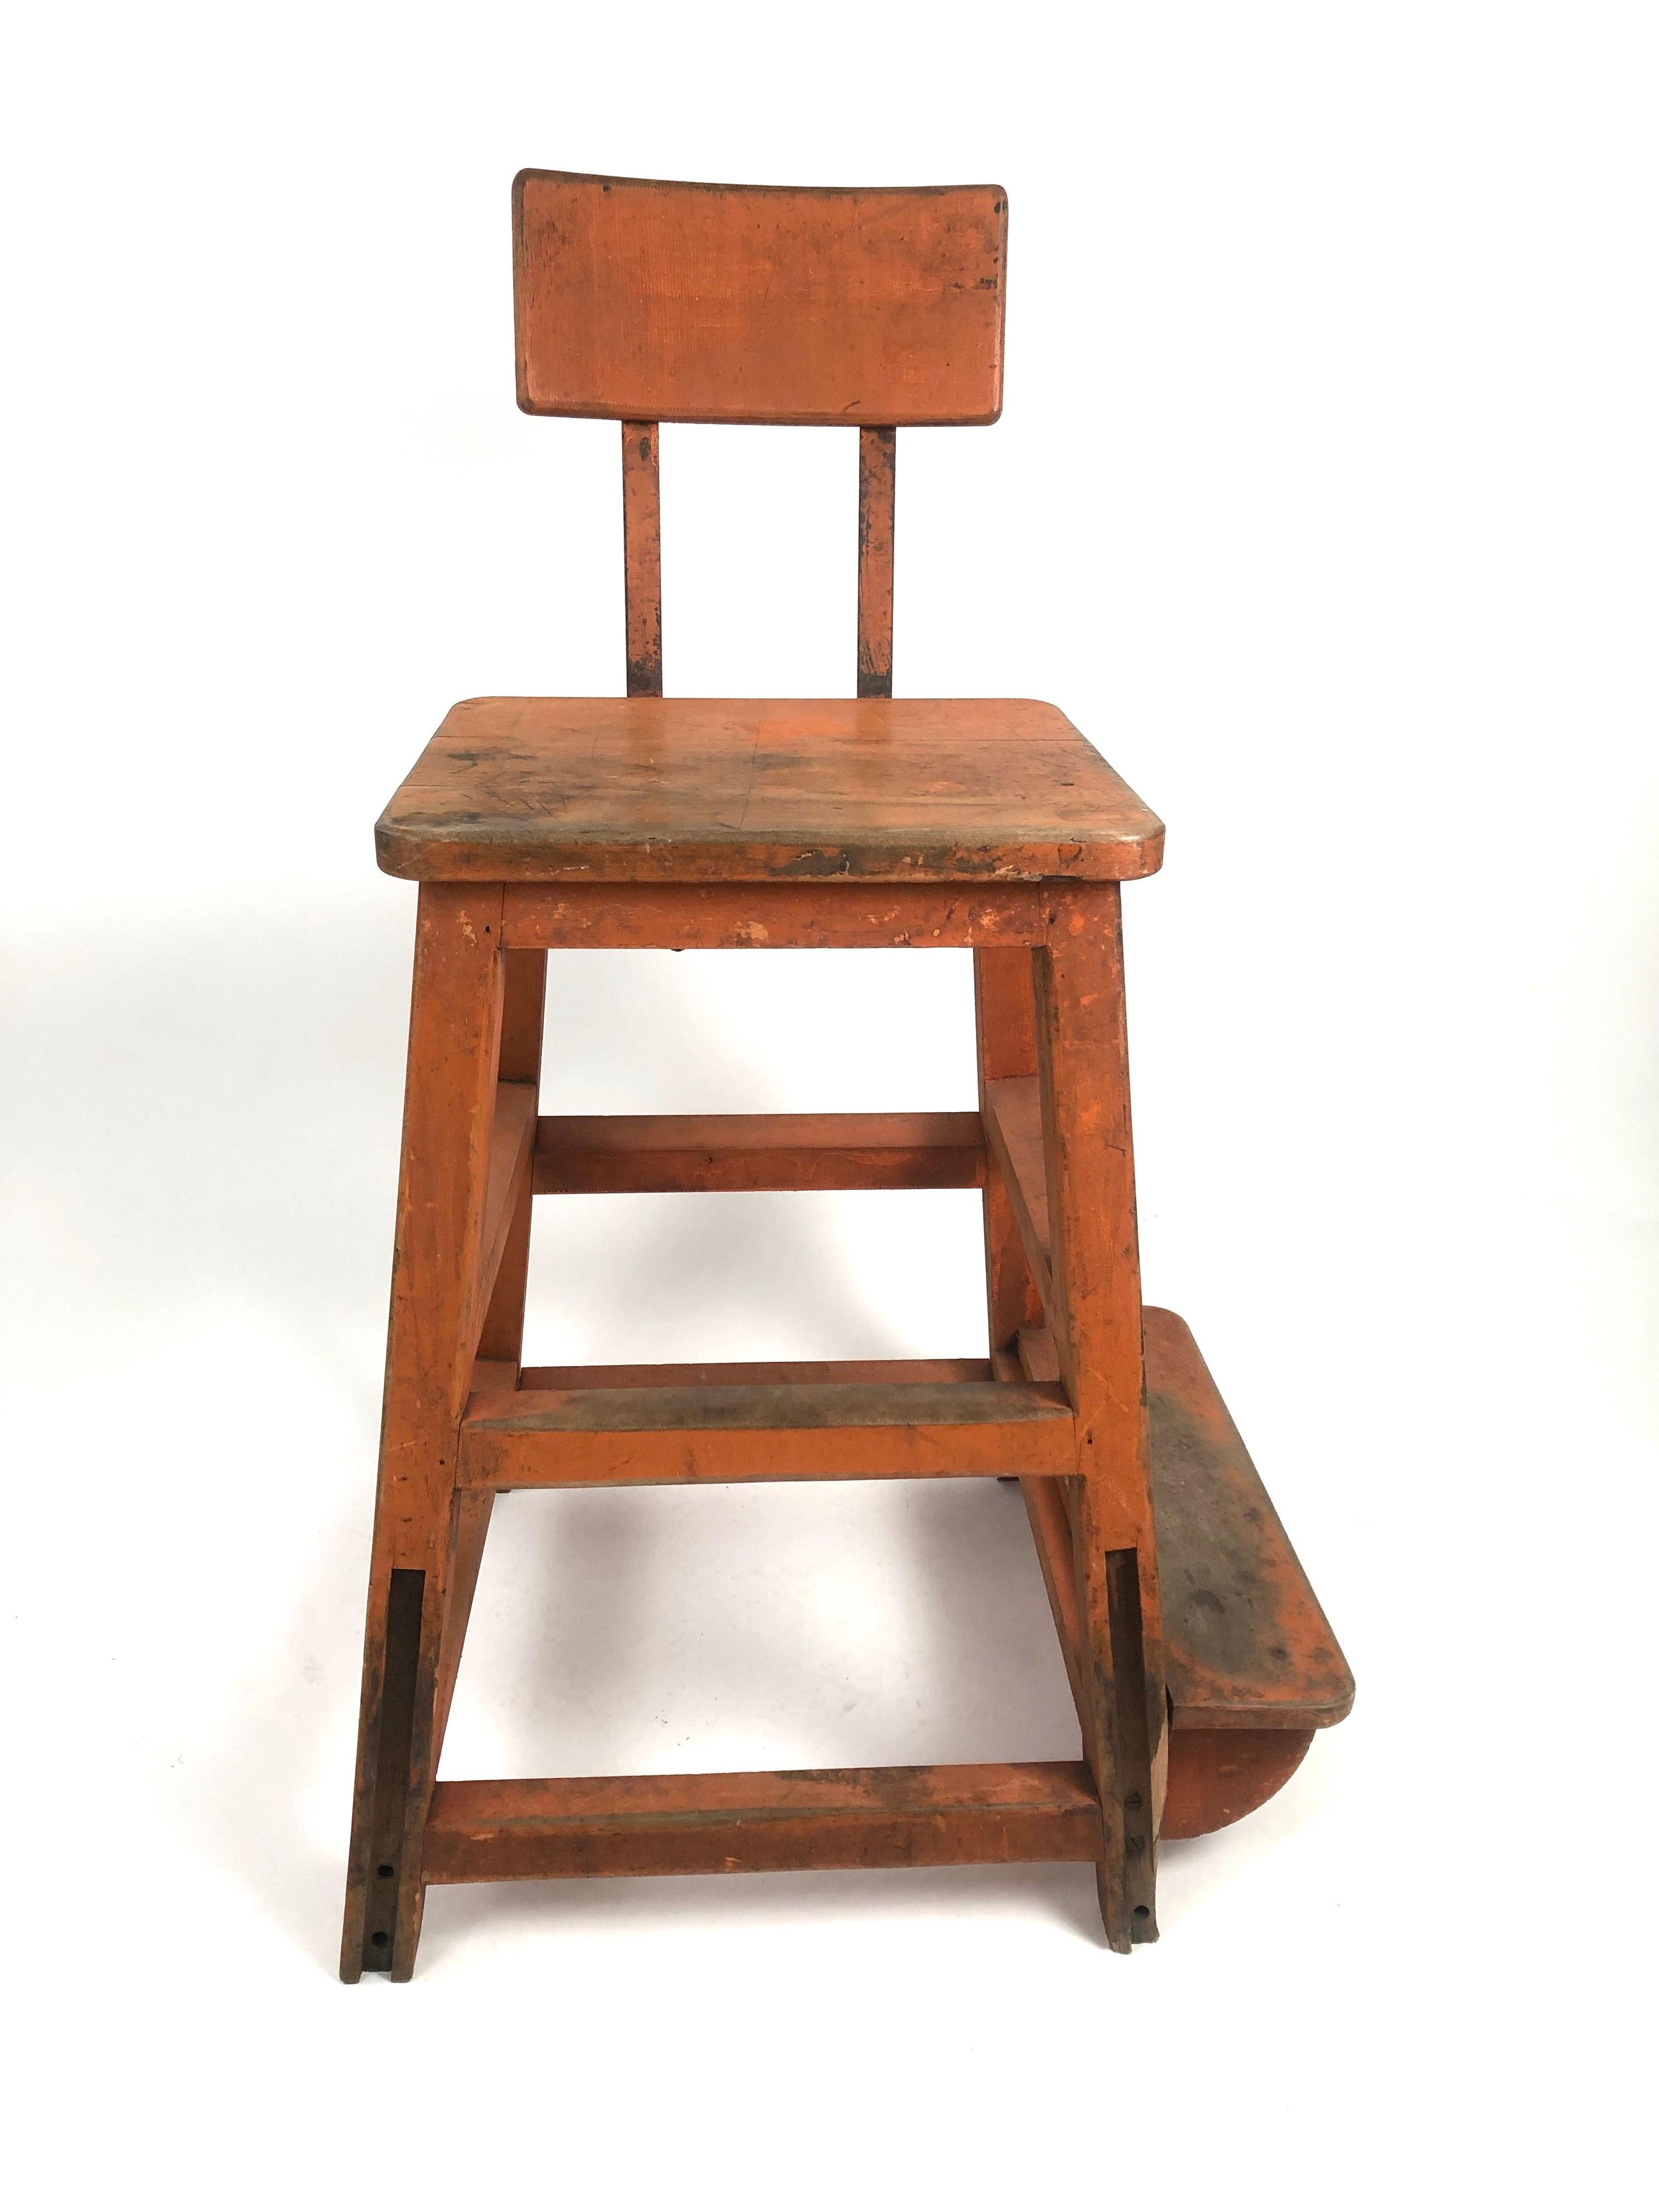 A sculptural, very sturdy and functional industrial orange painted wood and metal stool, or high chair, from a factory, circa 1920s, the curved rectangular back attached to the seat with iron bands connected to the square seat supported by 4